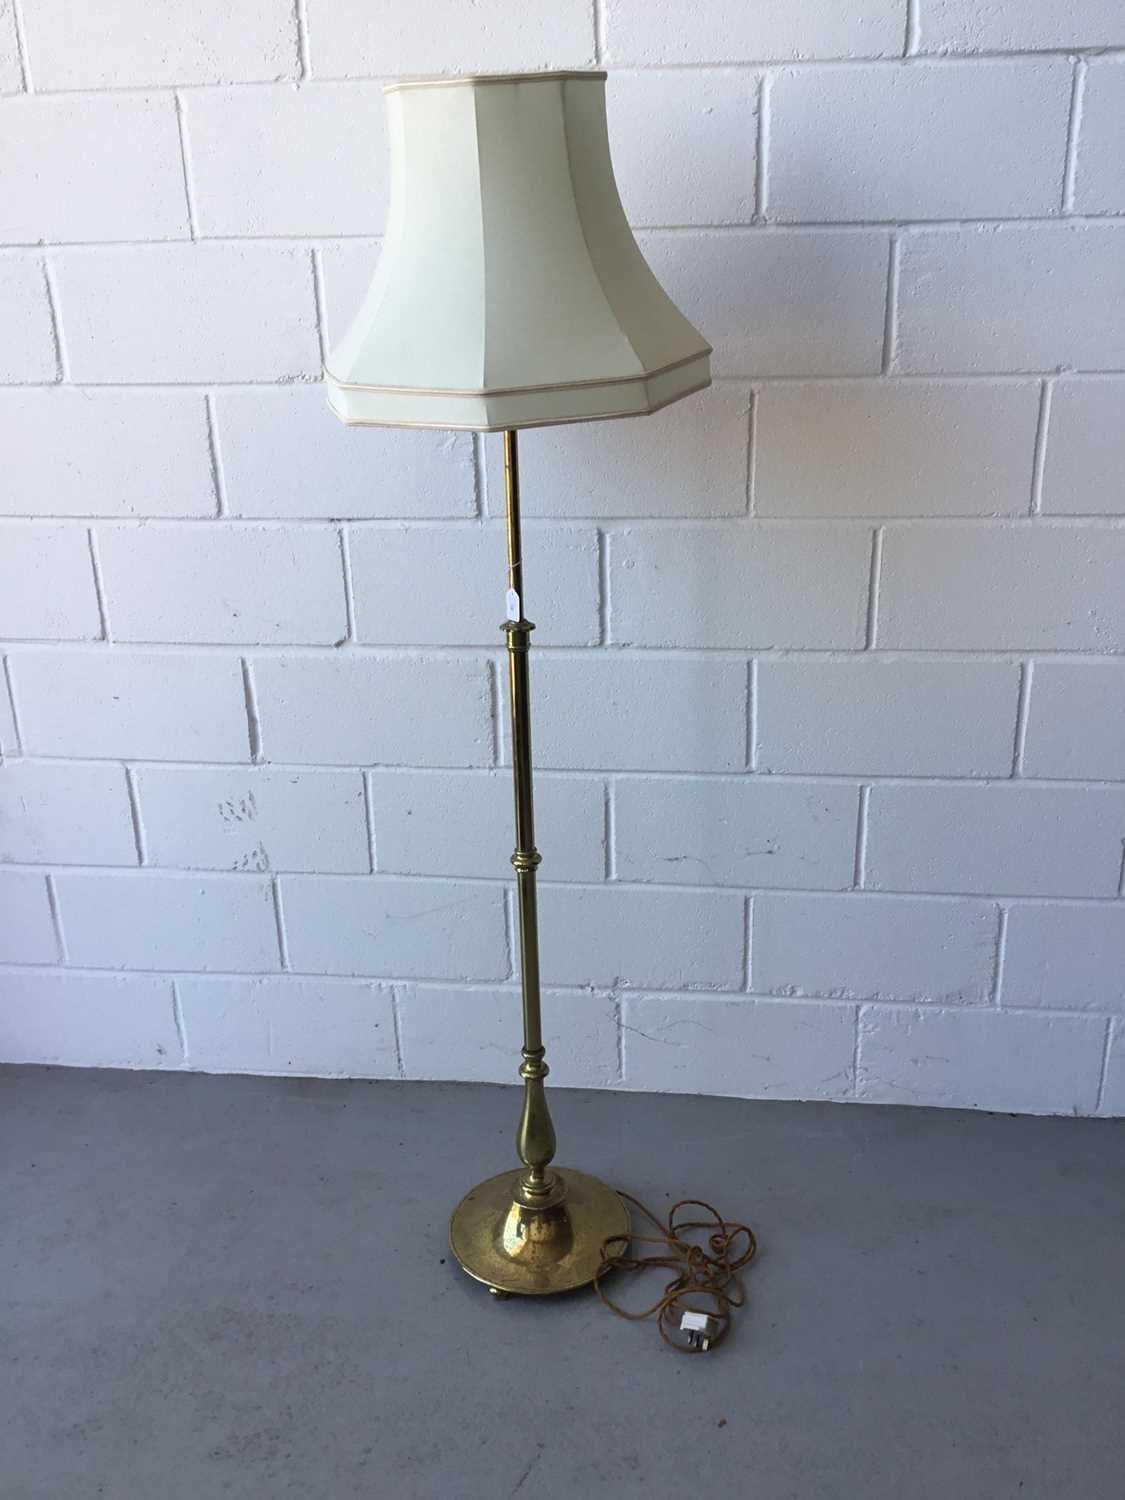 Lot 10 - Brass standard lamp, with telescopic column and cream shade, 210cm in overall height (column extended fully)